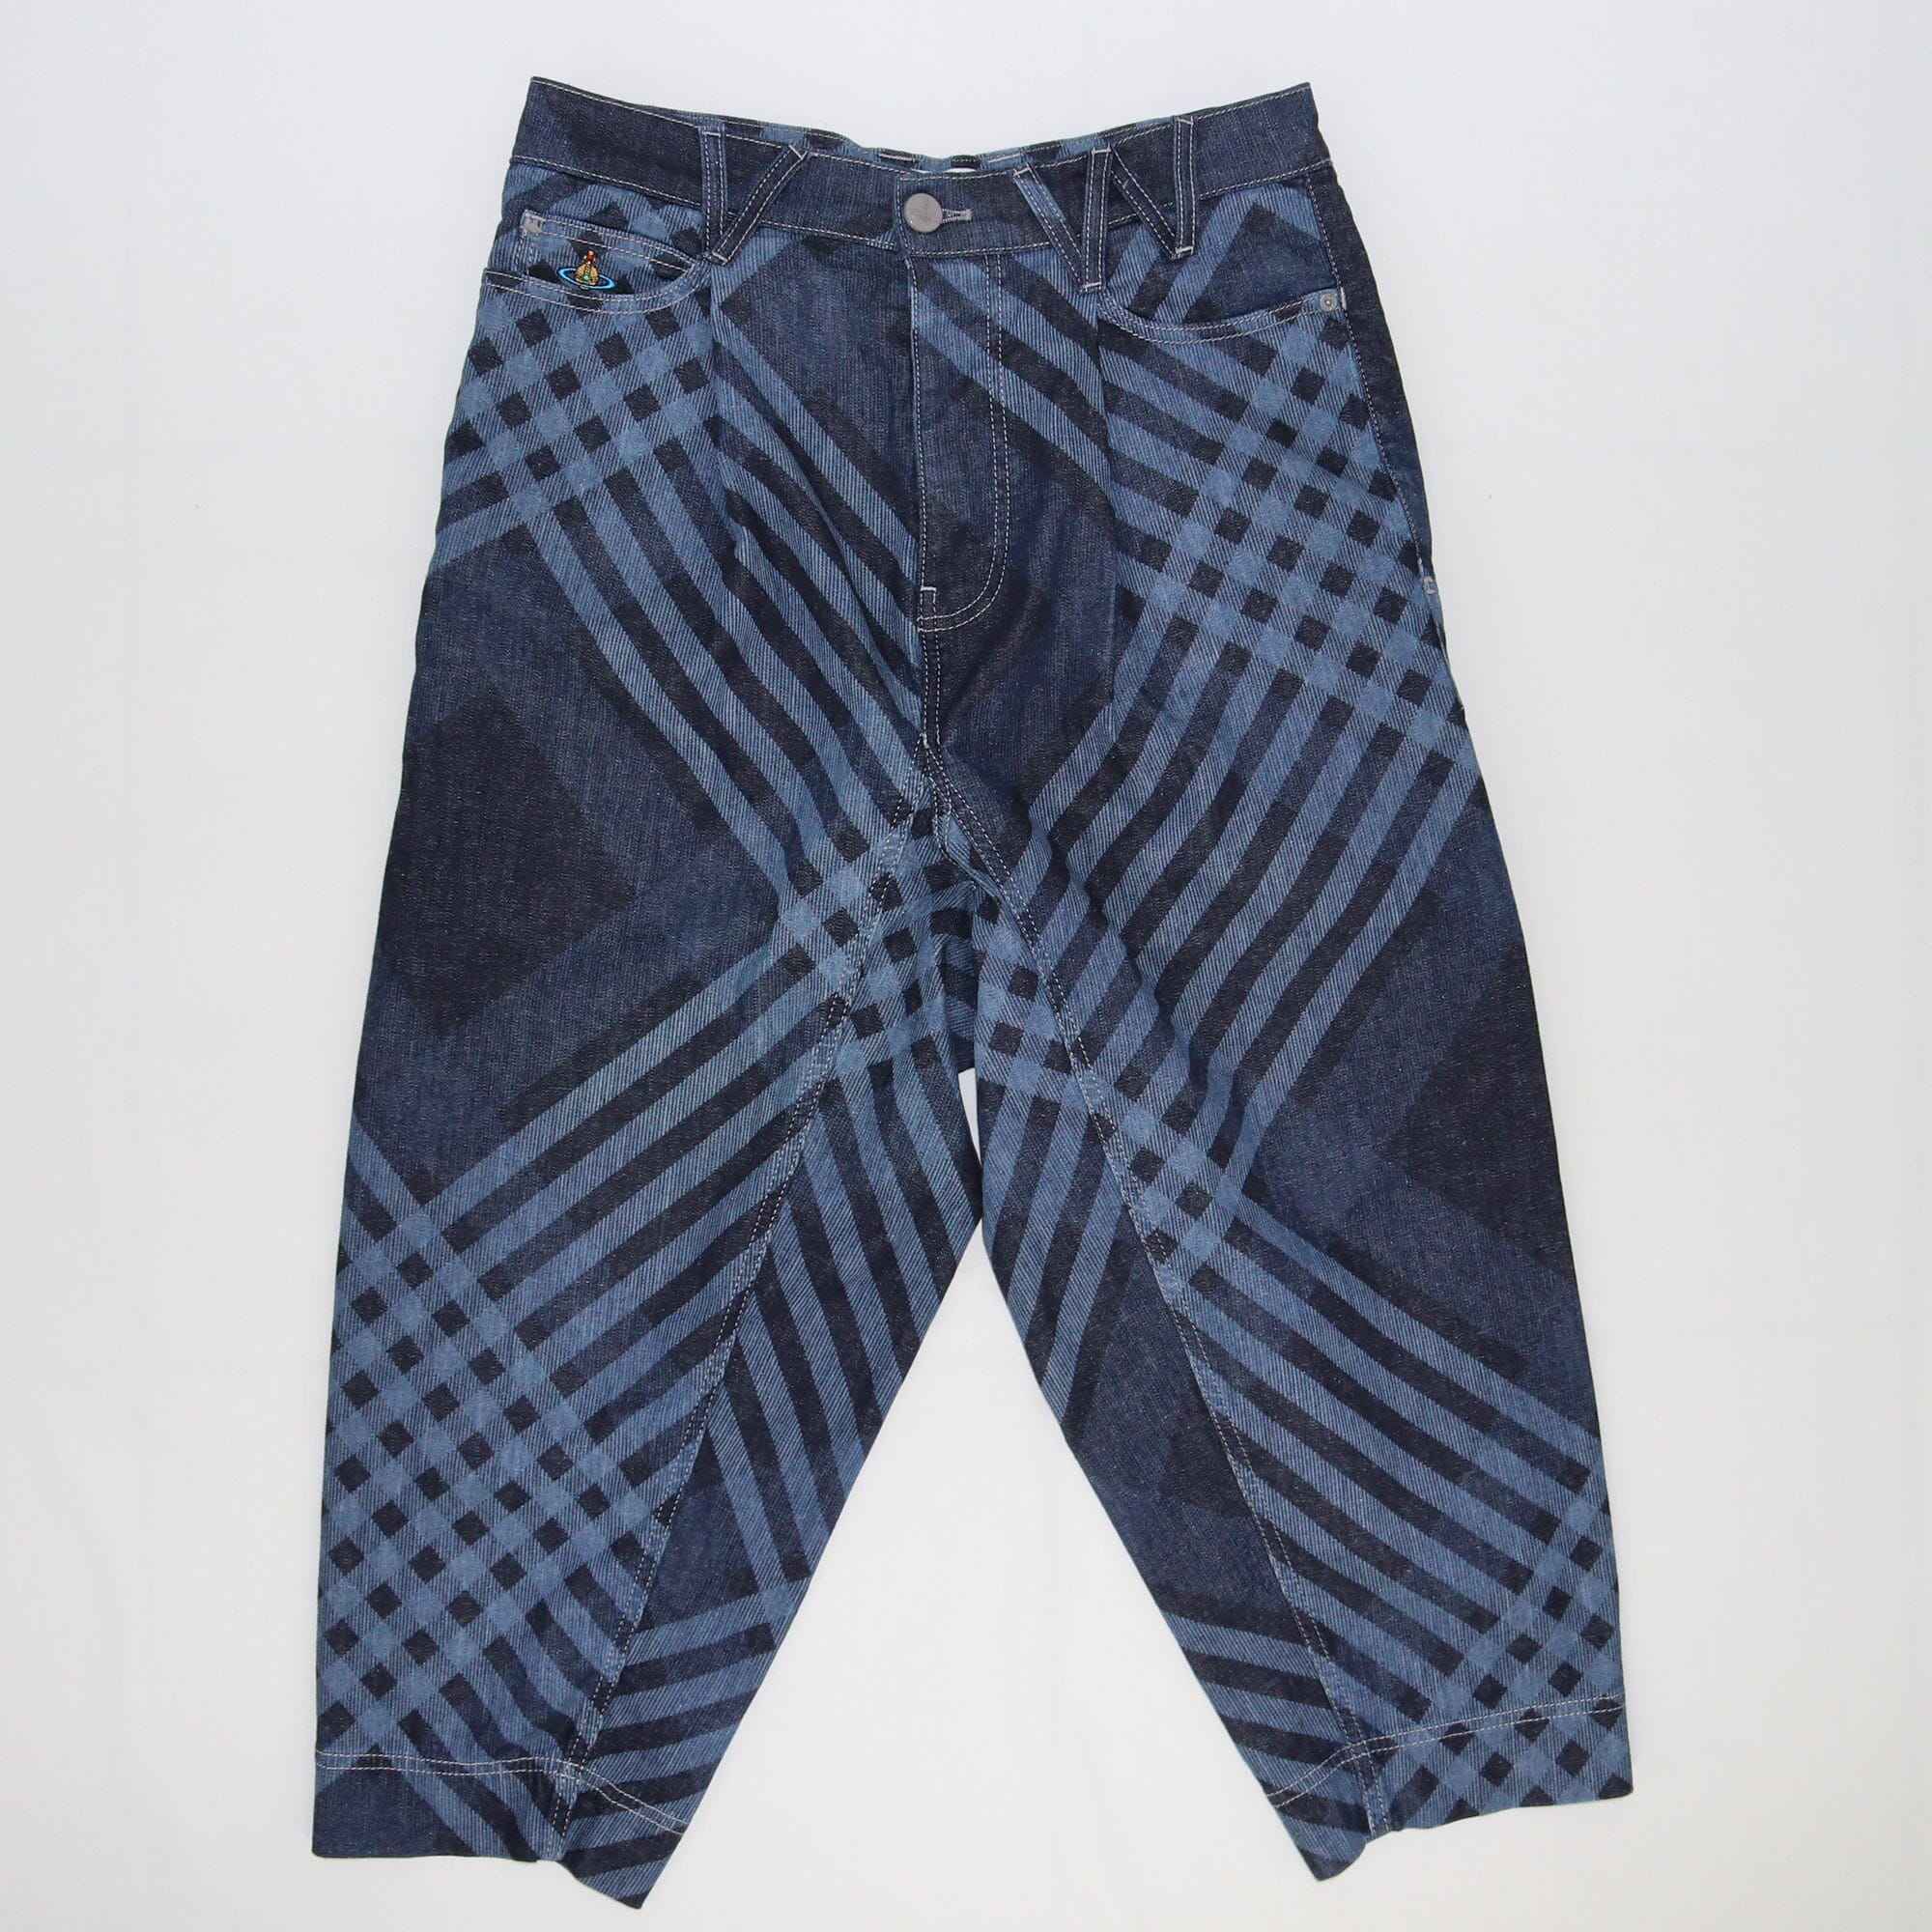 Vivienne Westwood Blue Cruise Checked Macca Jeans Clothing Vivienne Westwood 